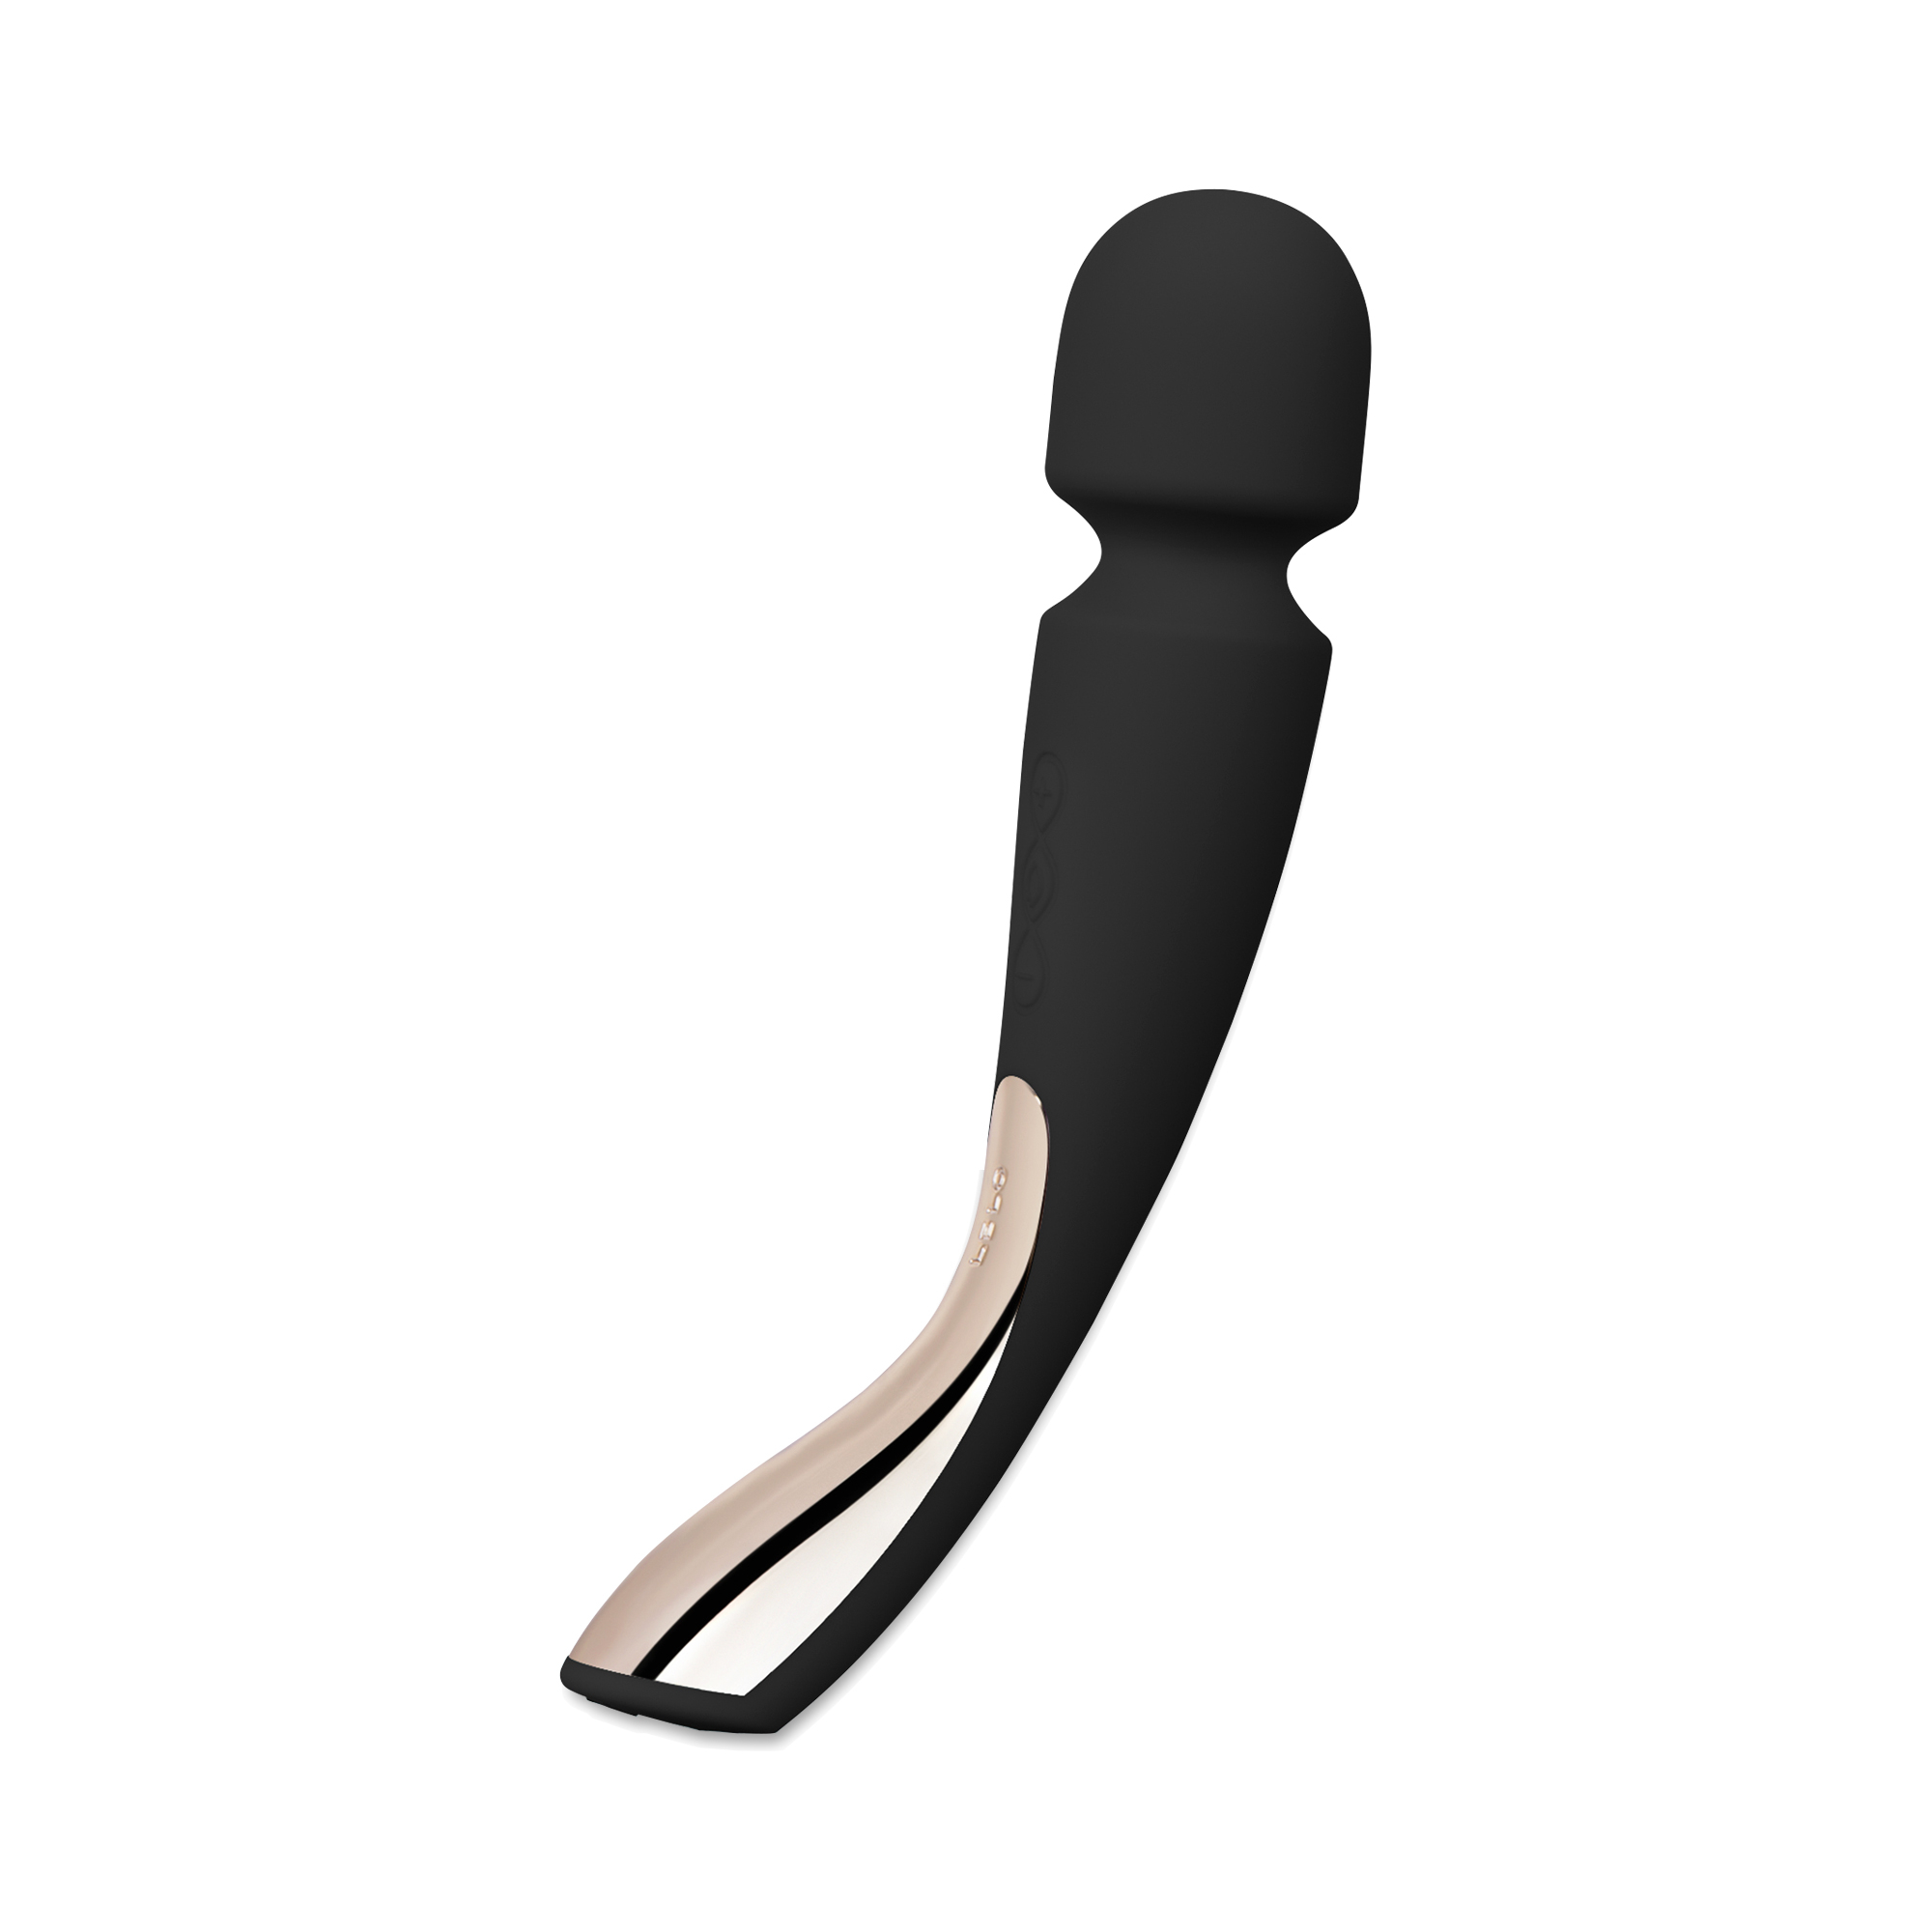 Lelo Smart Wand 2, All-over body massager, Black 1 count